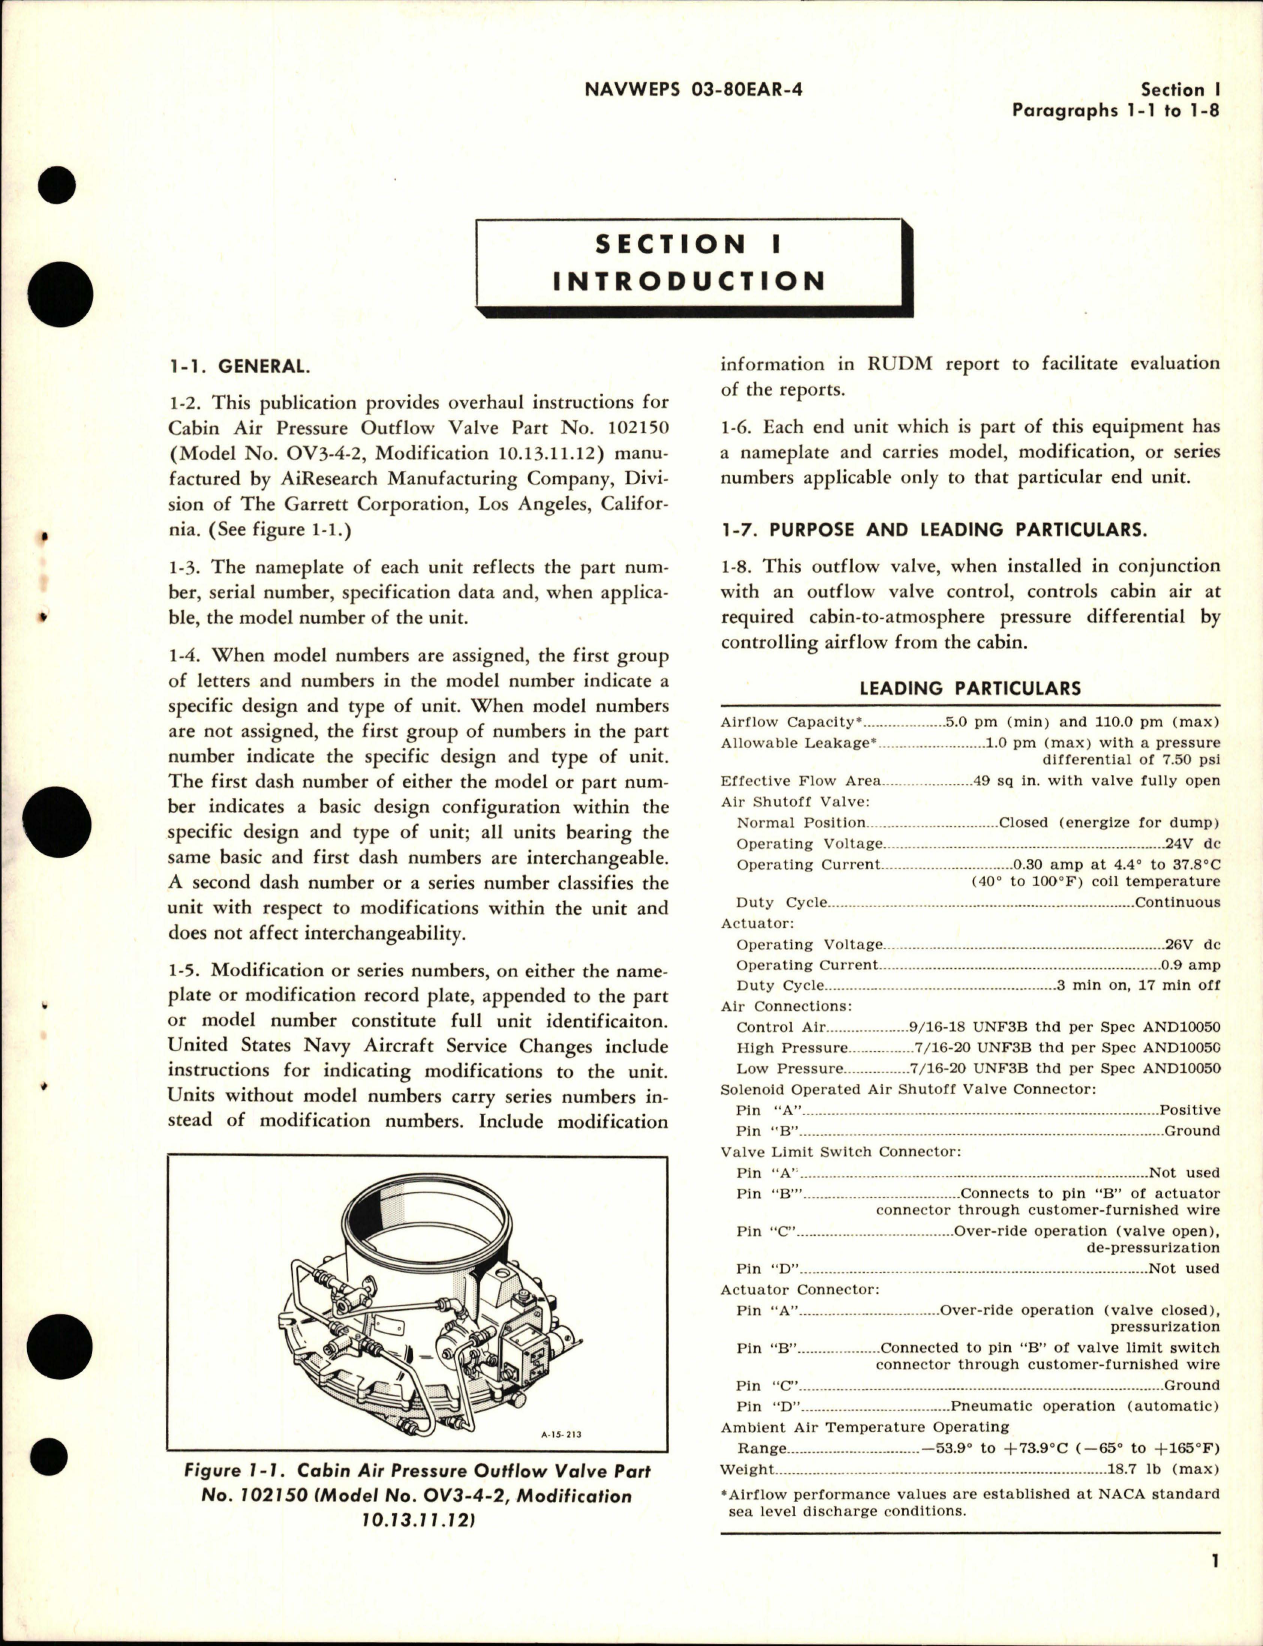 Sample page 5 from AirCorps Library document: Overhaul Instructions for Cabin Air Pressure Outflow Valves - Part 102150 and 102150-0